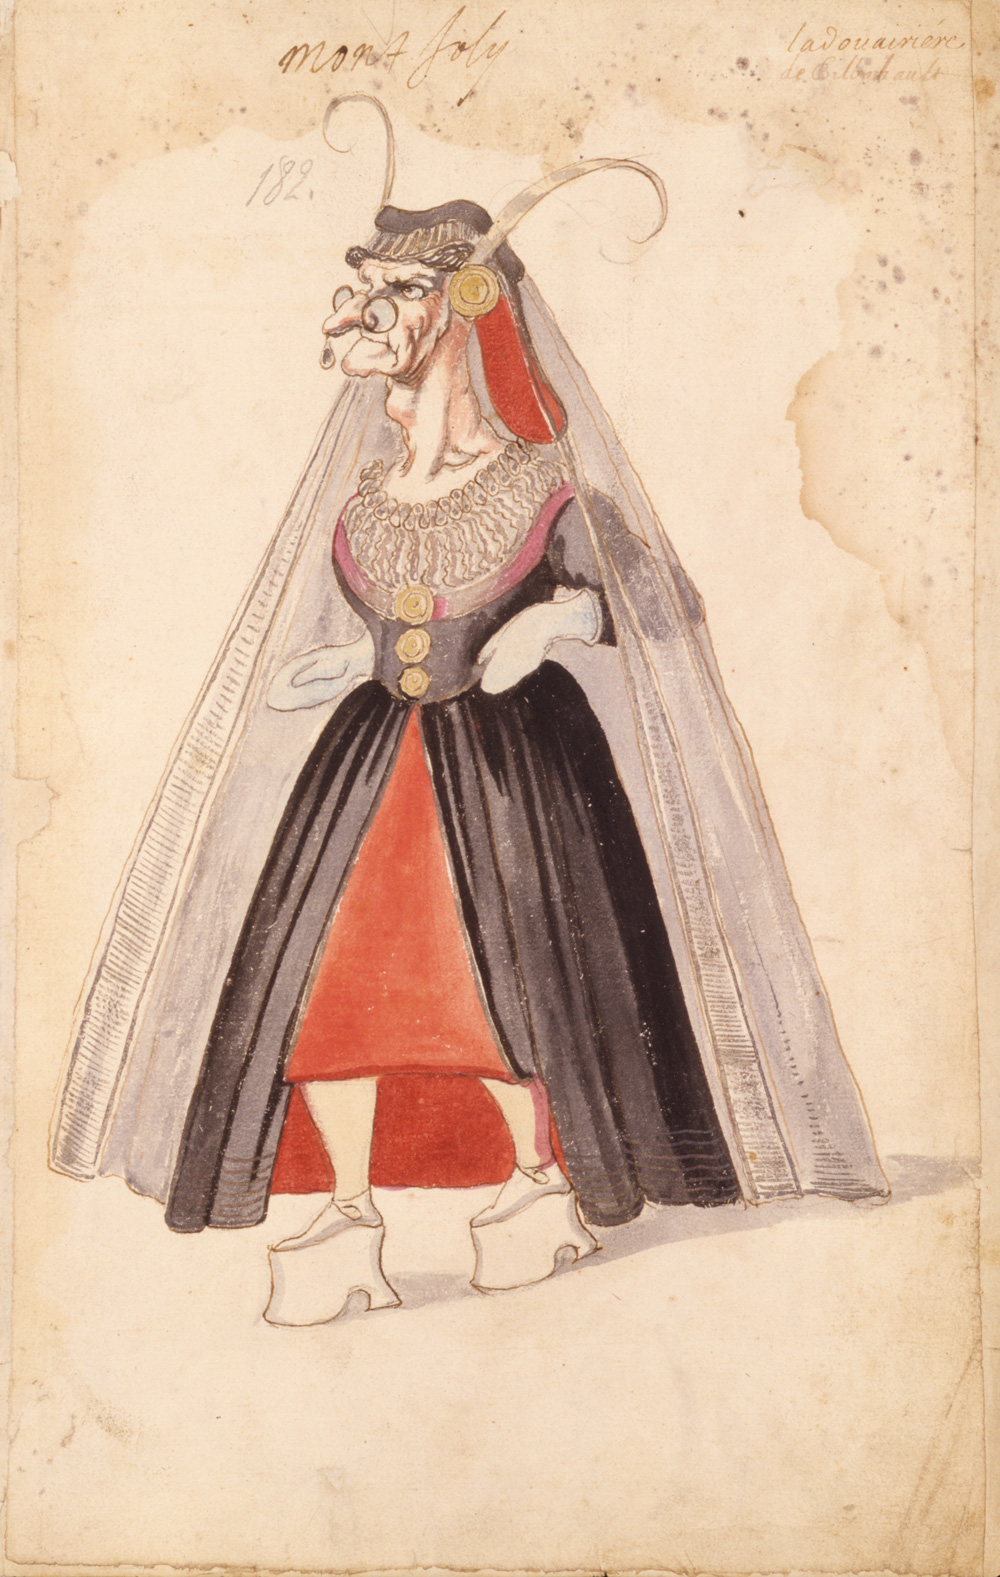 Costume of a noble woman under King Louis XIV of France